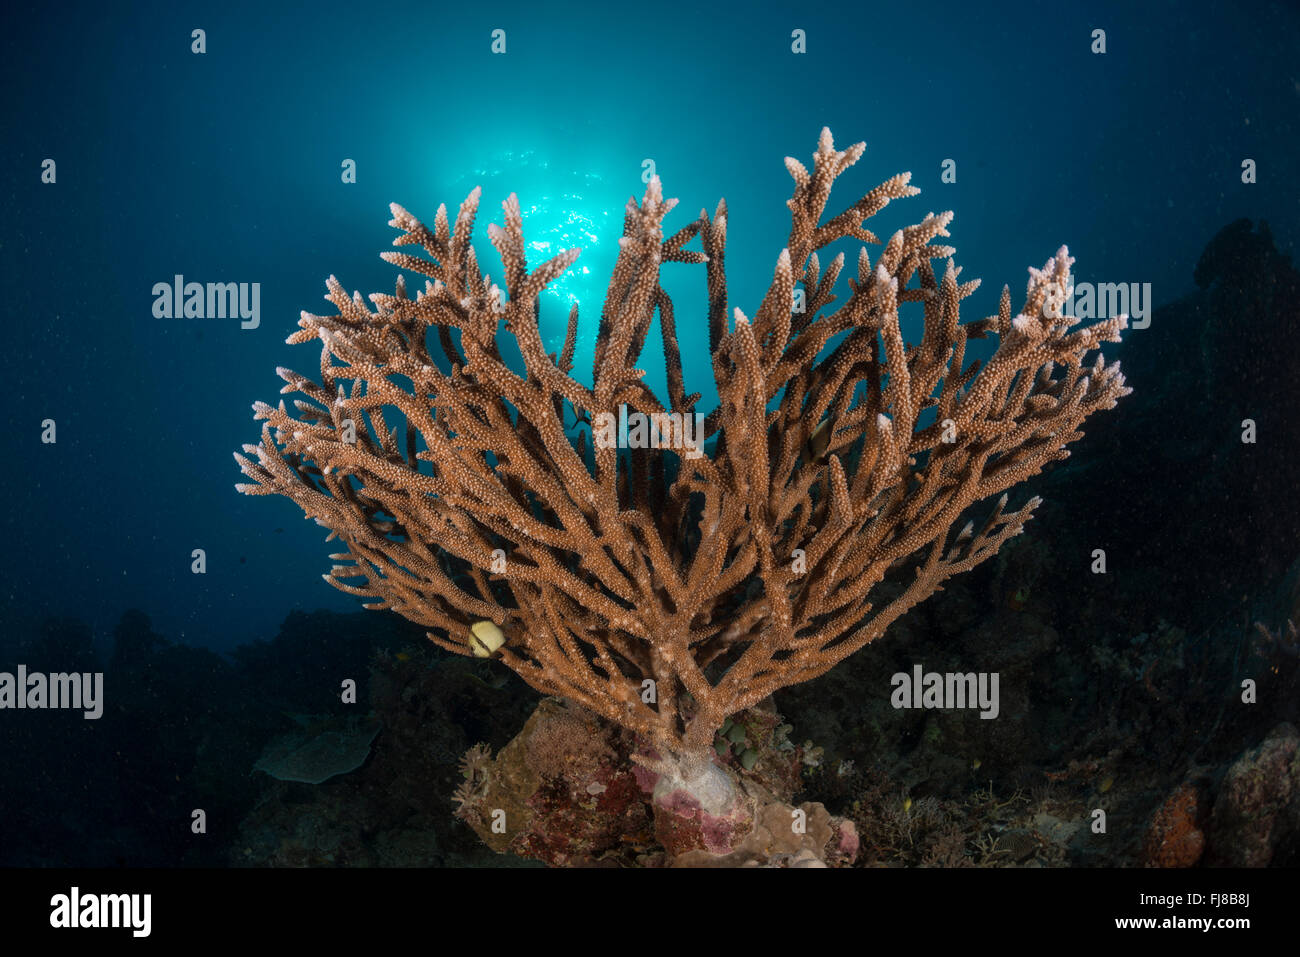 Acropora branching corals healthy in the Great Barrier Reef Stock Photo